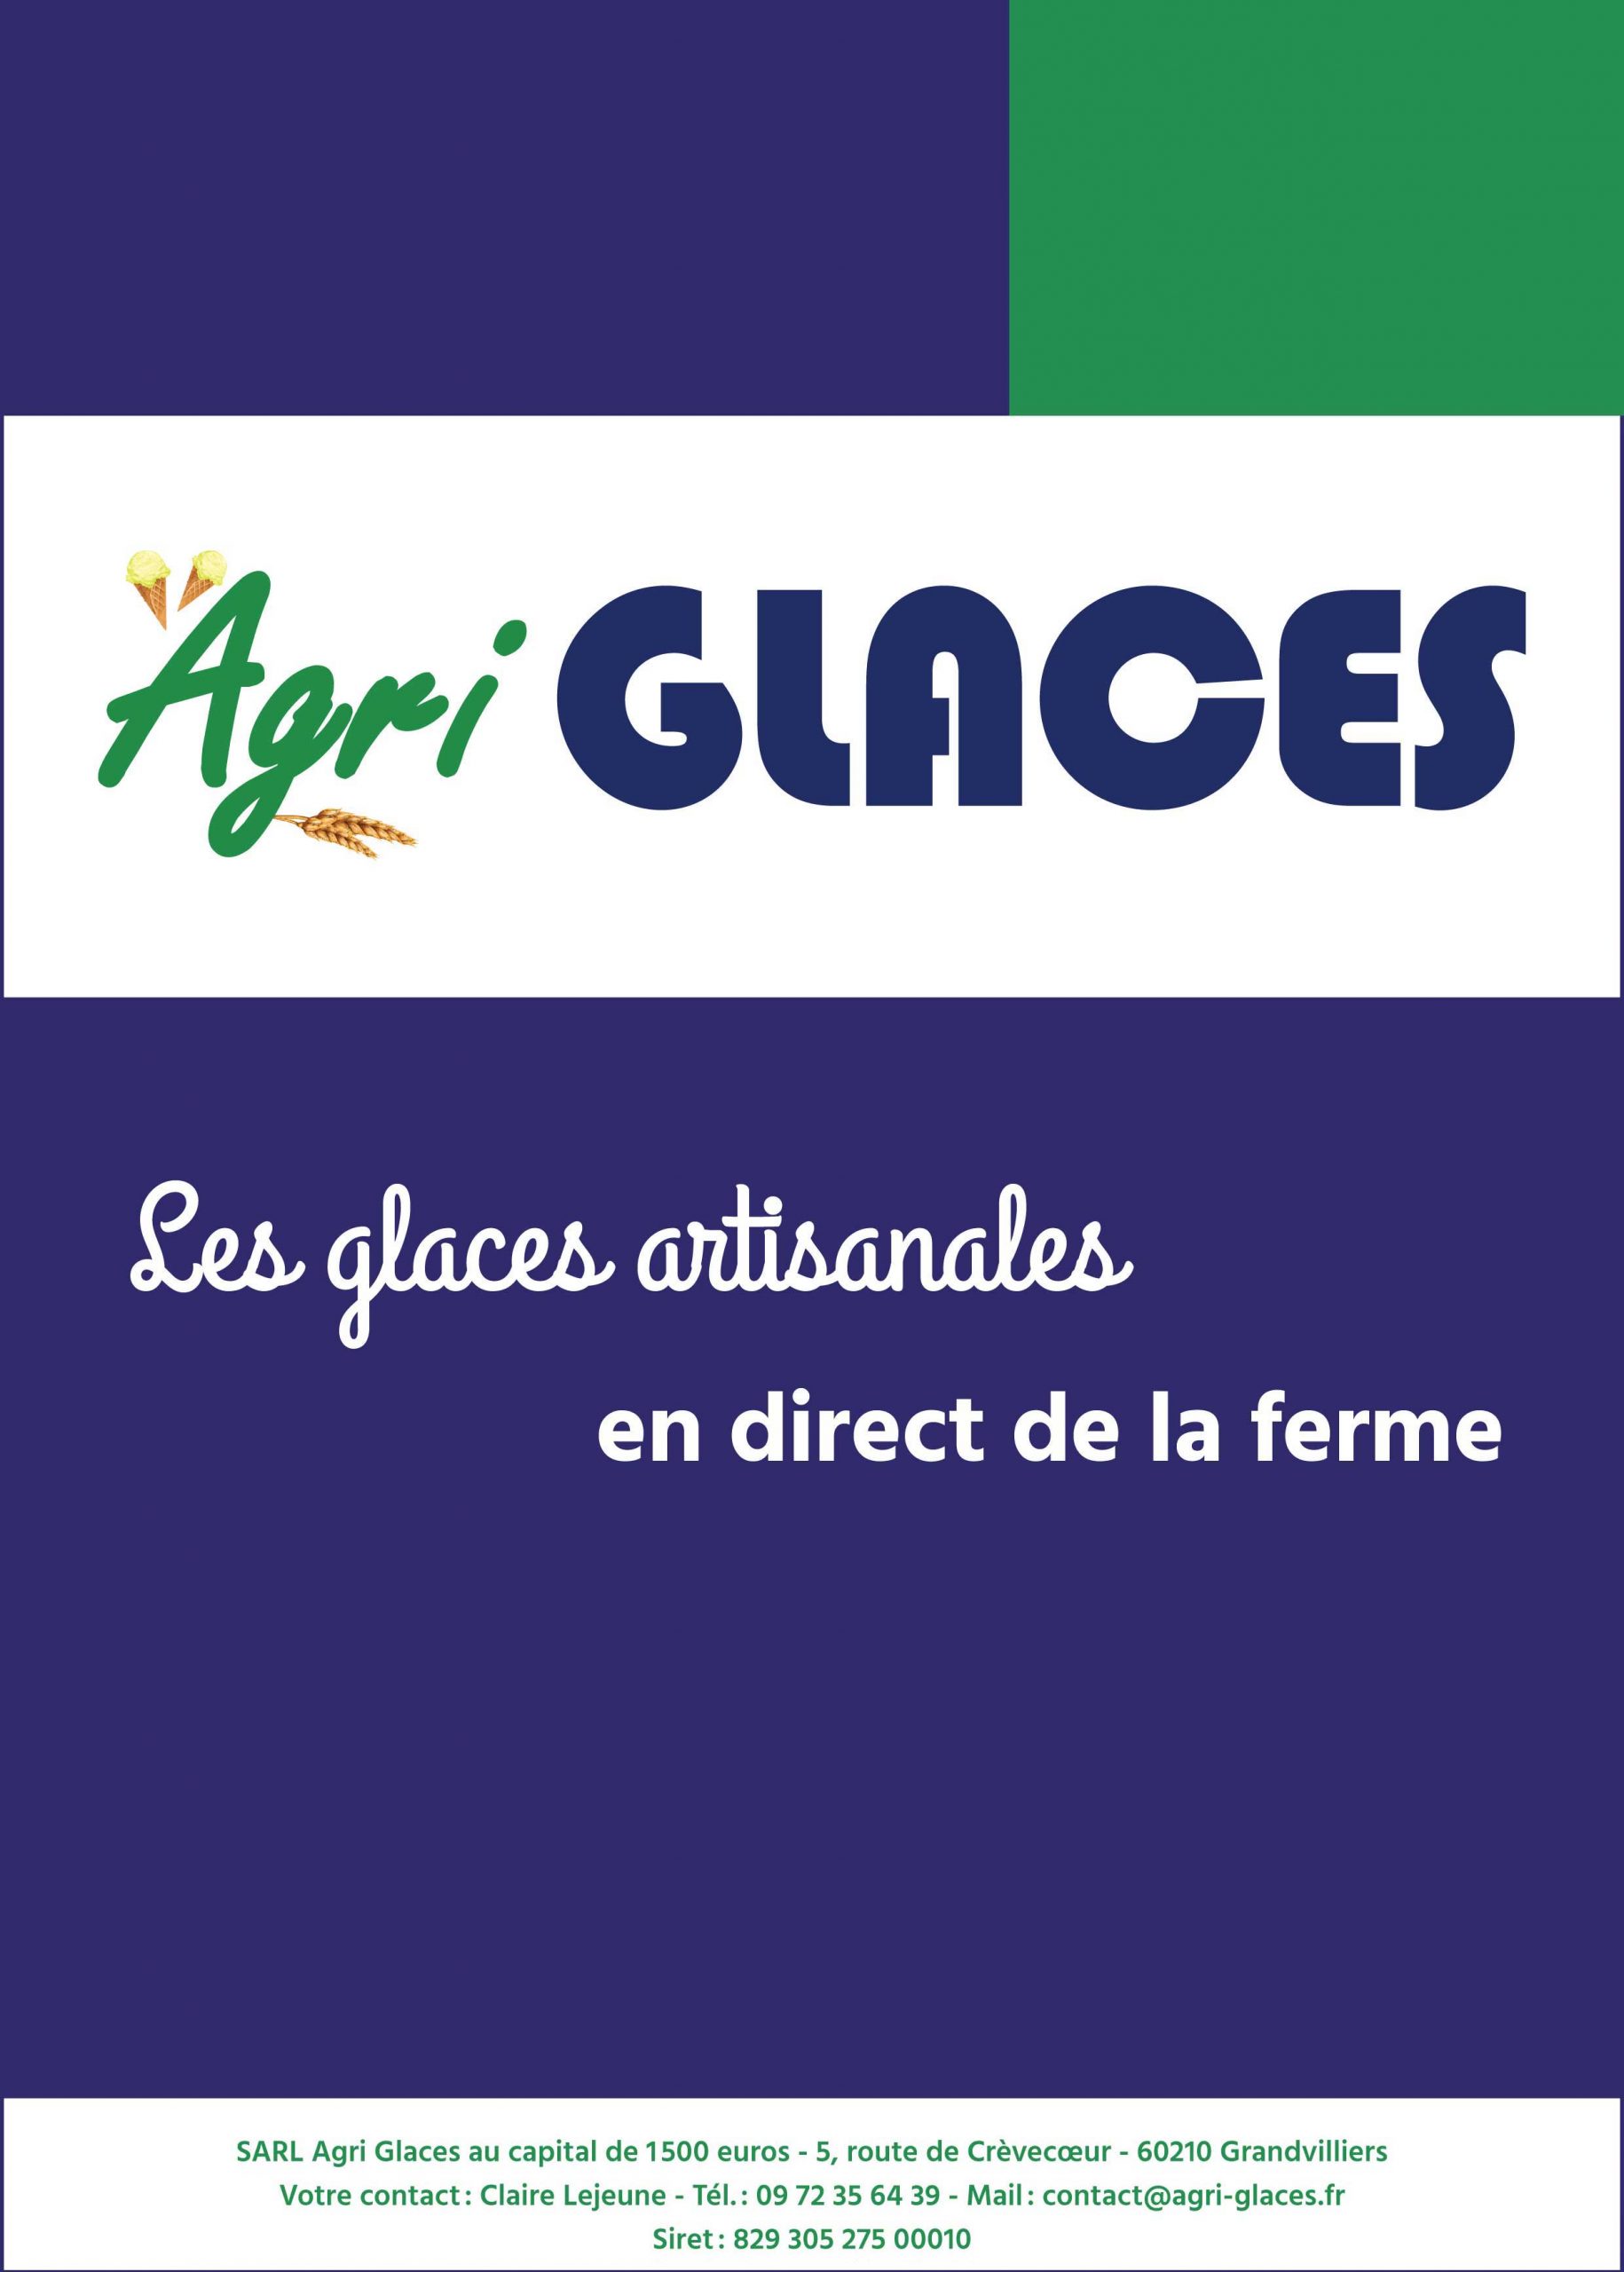 image-plaquette-agri-glaces-1-scaled